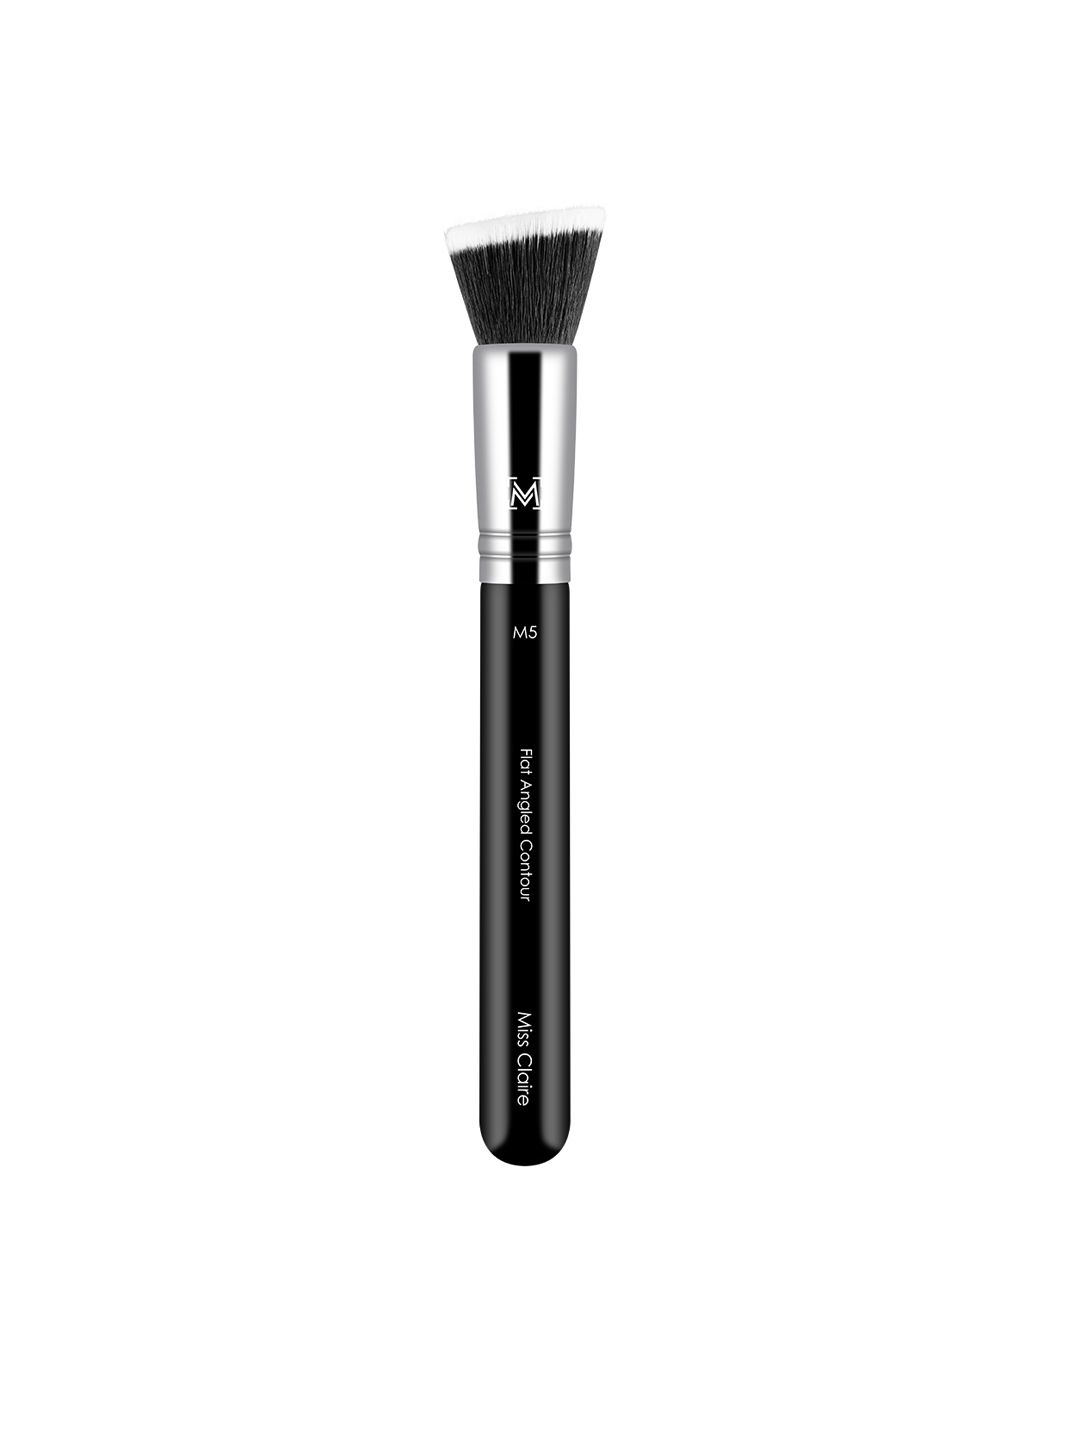 Miss Claire M5 - Flat Angled Contour Brush - Silver-Toned & Black Price in India